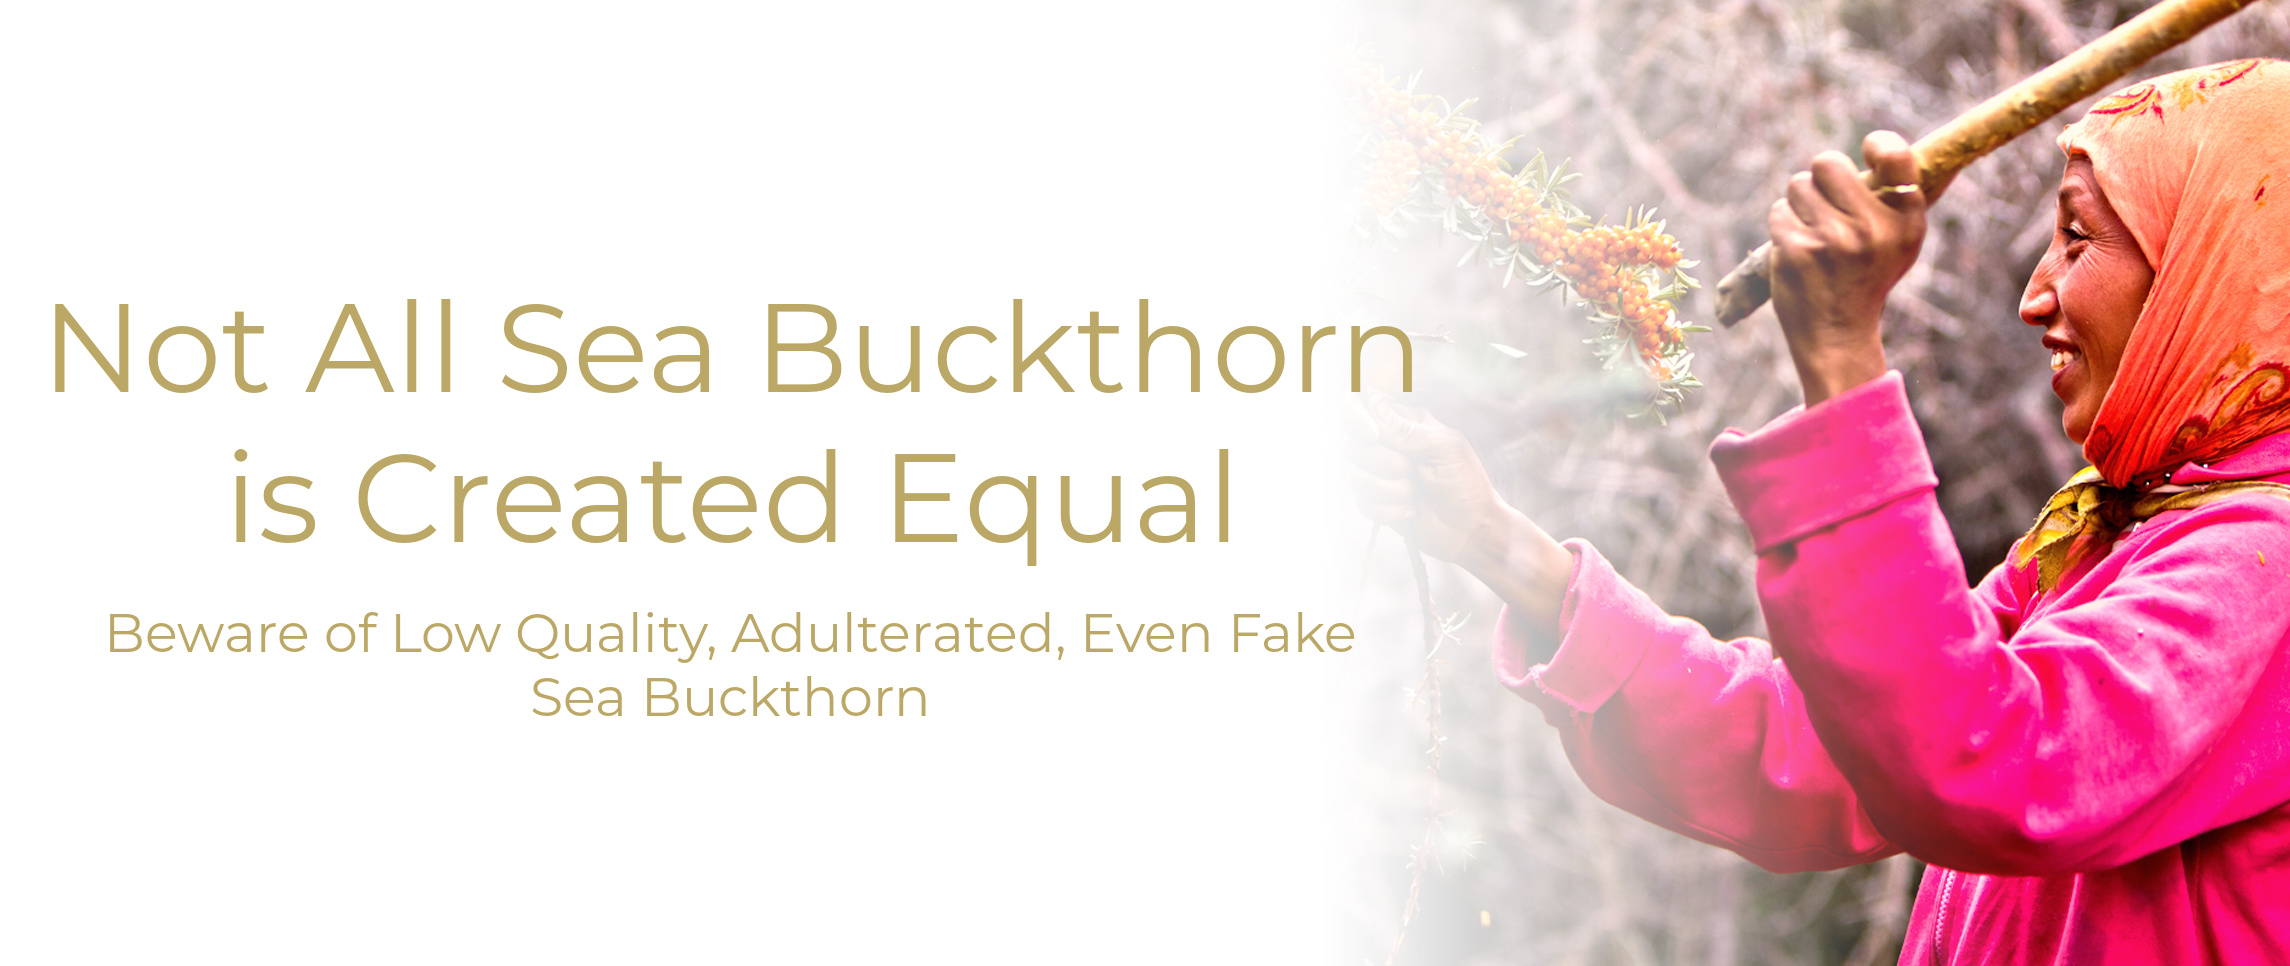 All natural sea buckthorn skin care